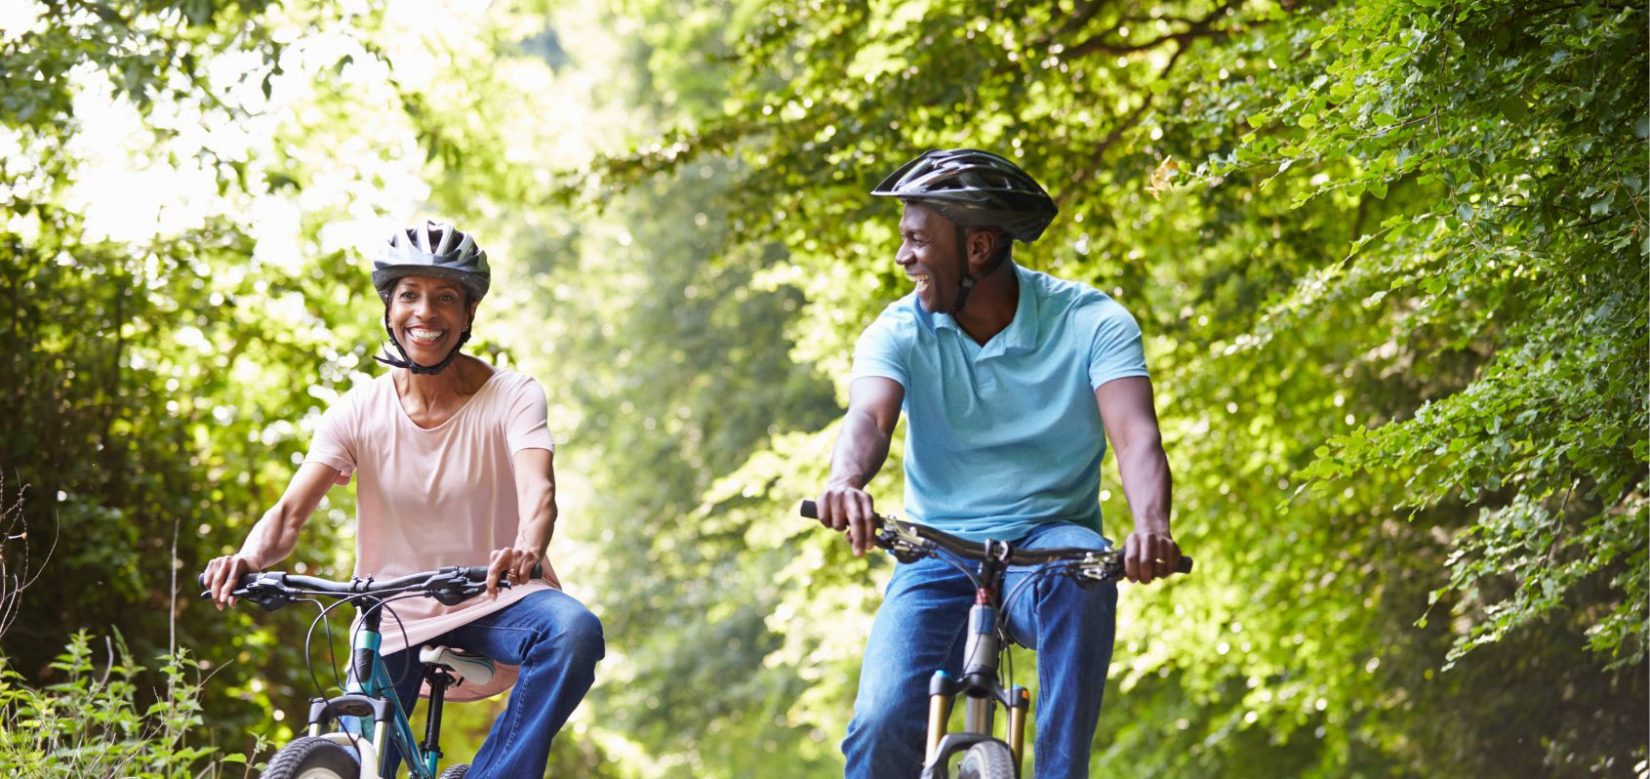 Middle-aged couple smiling while riding bikes on a sunny day